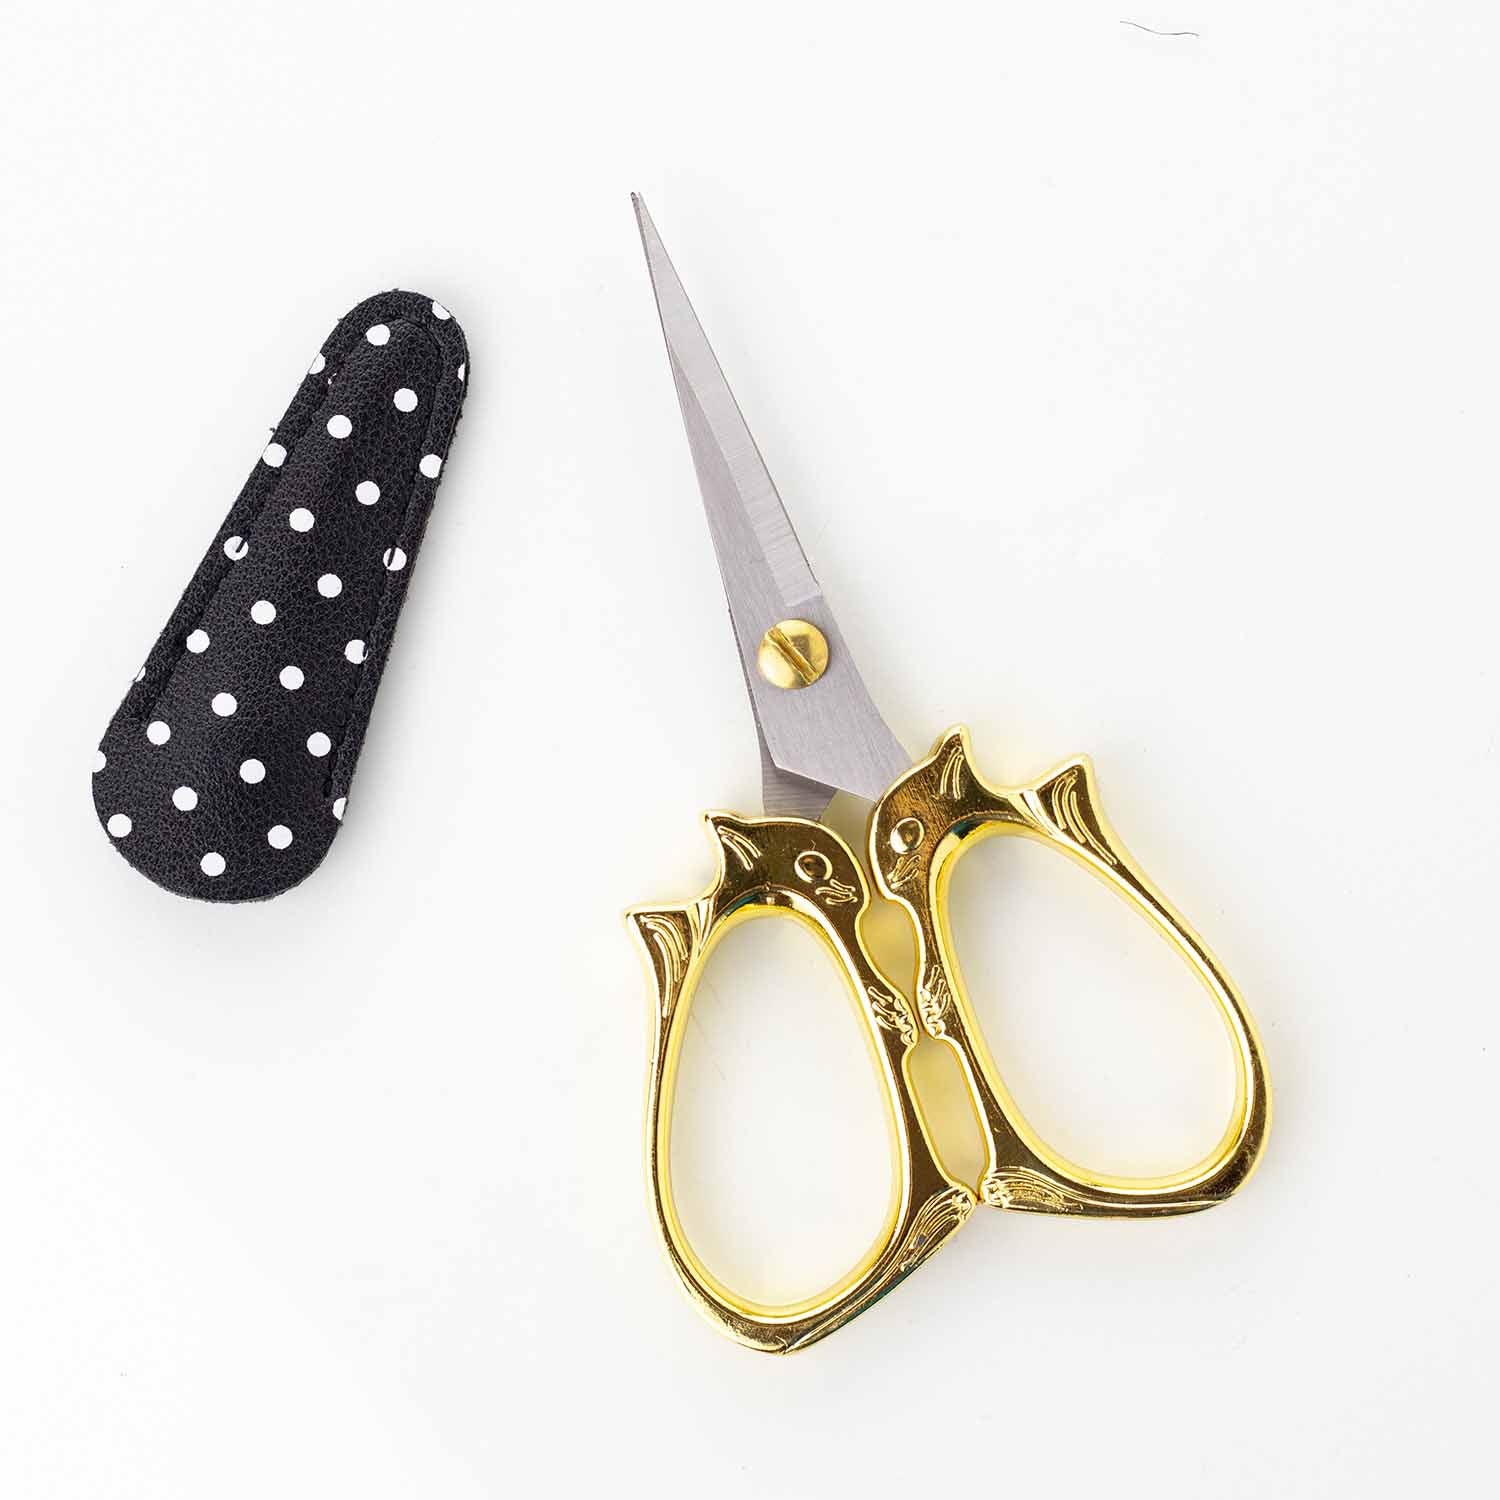 Vintage Lot Of 2 Pair Embroidery Small Sewing Scissors Stainless